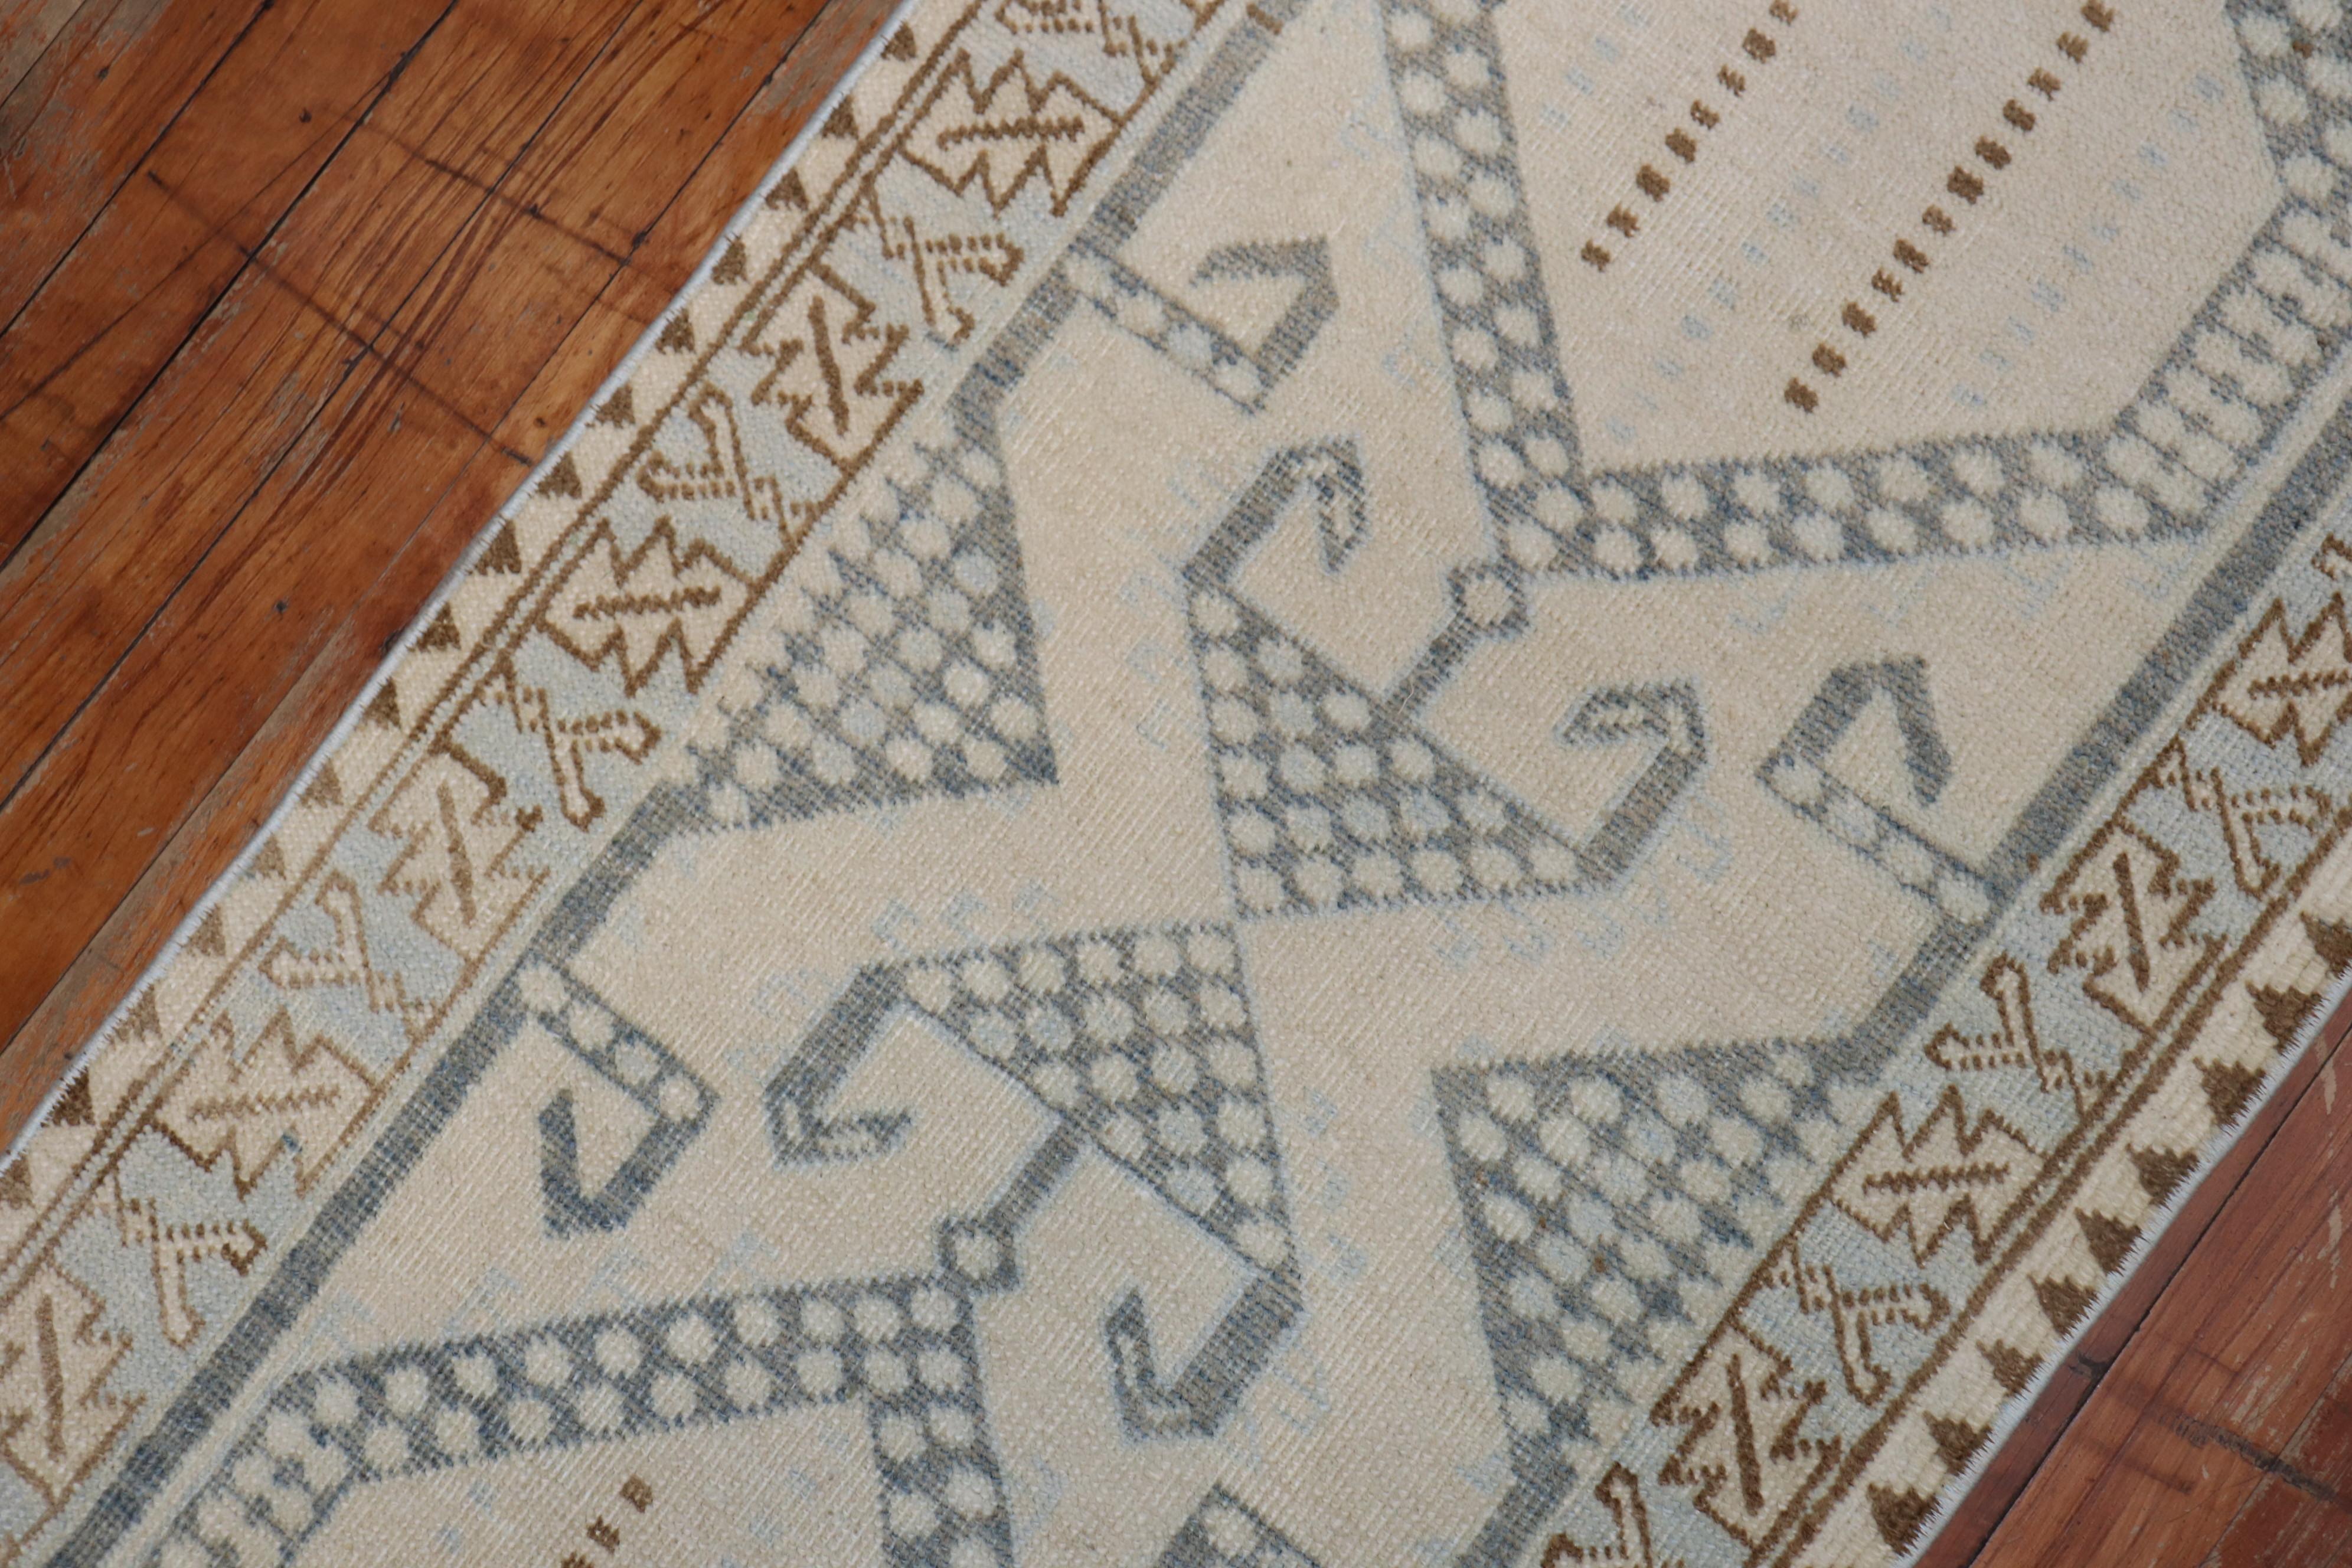 Wool Narrow Neutral Color Persian Runner, Mid-20th Century For Sale